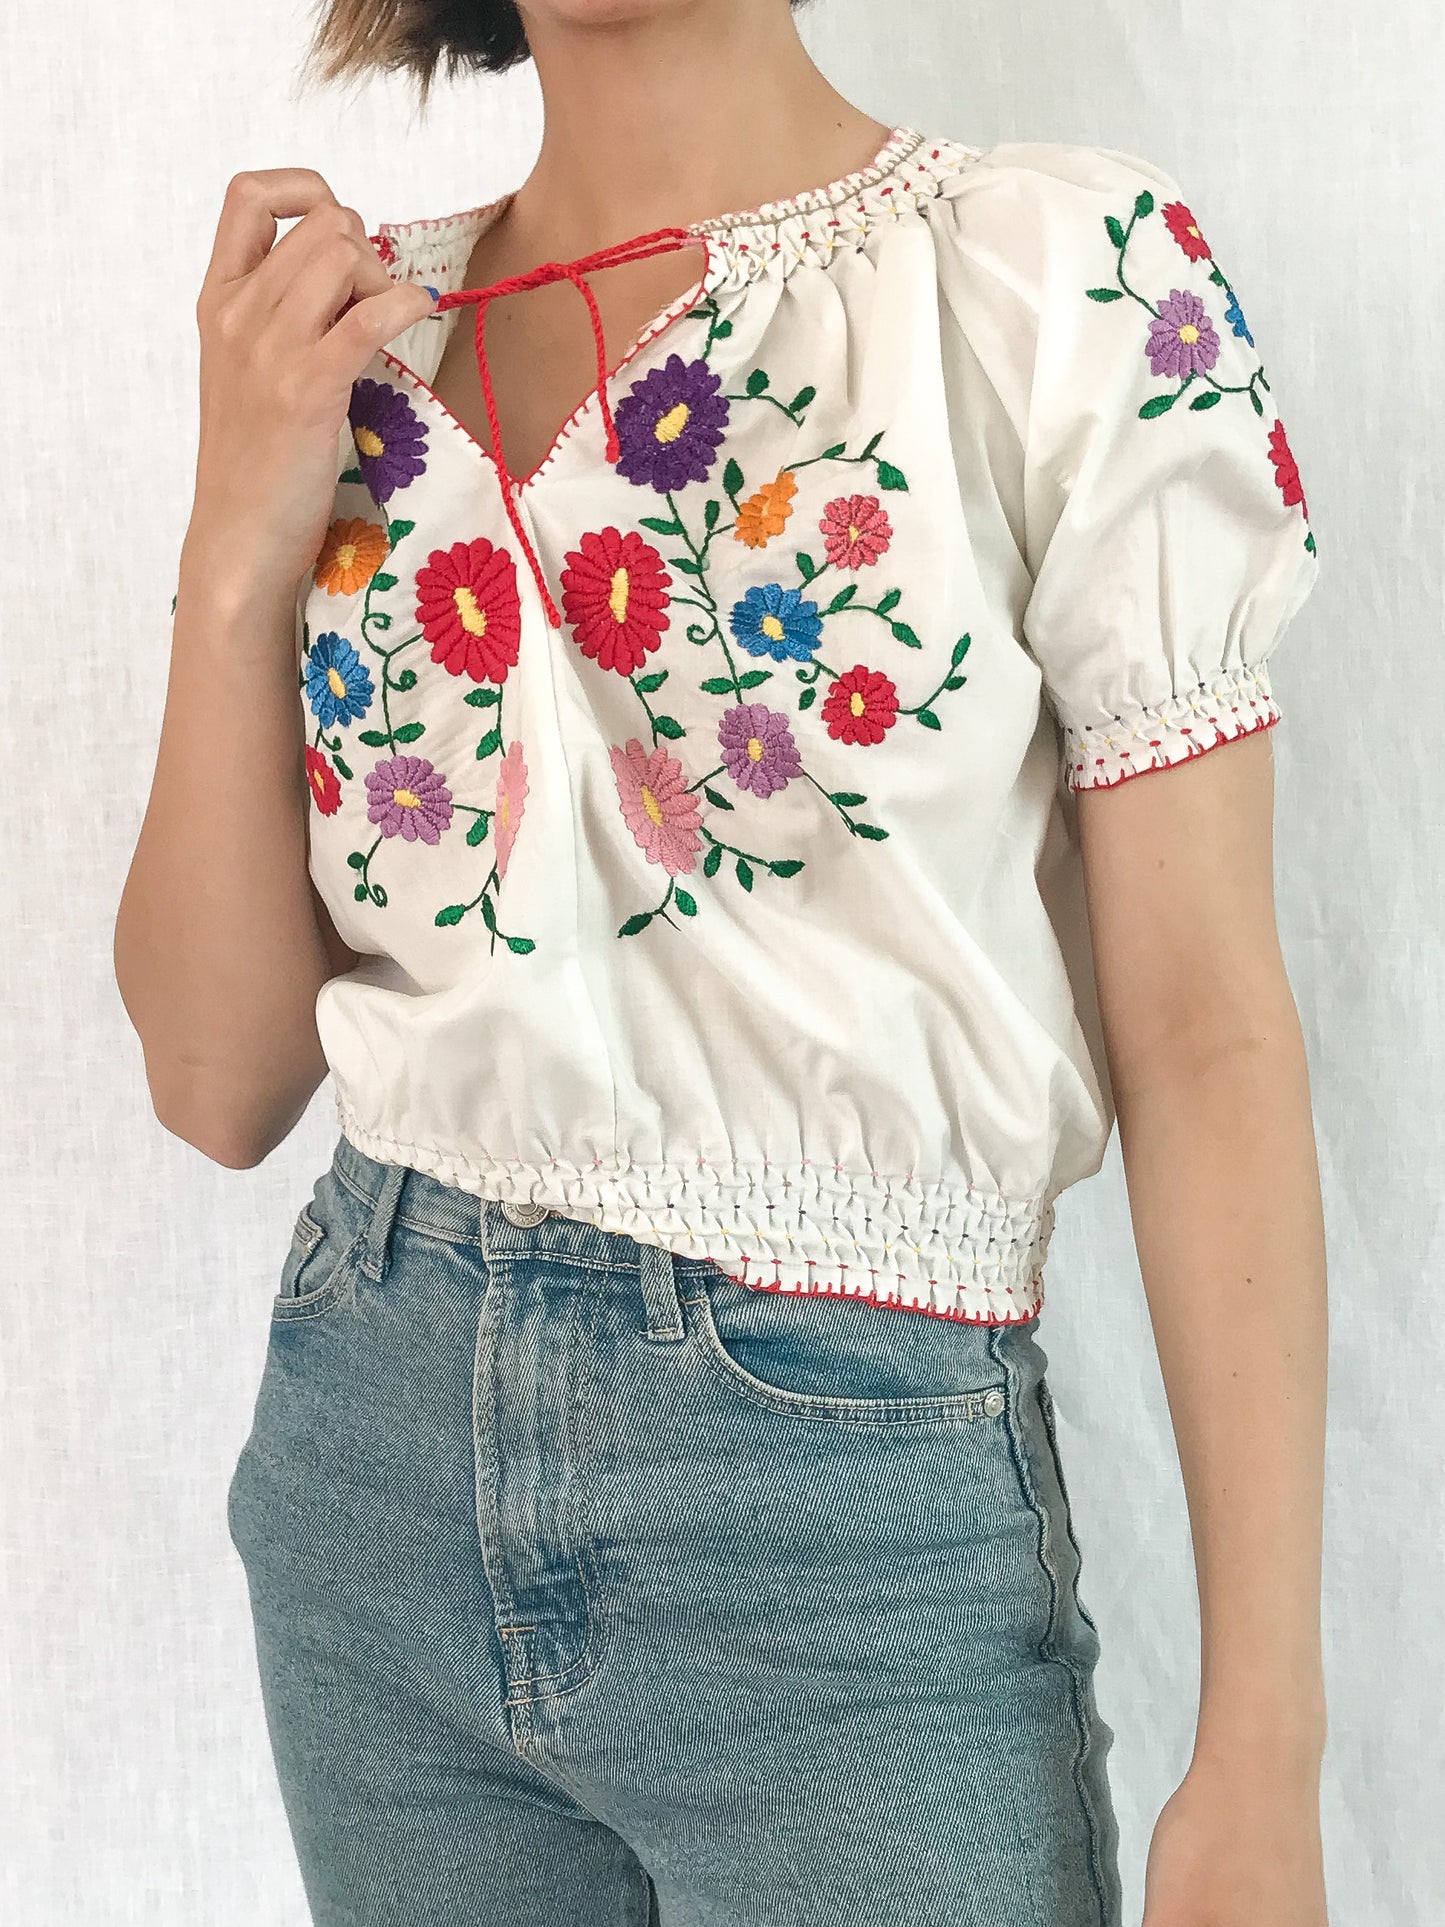 Vintage Embroidered Peasant Blouse